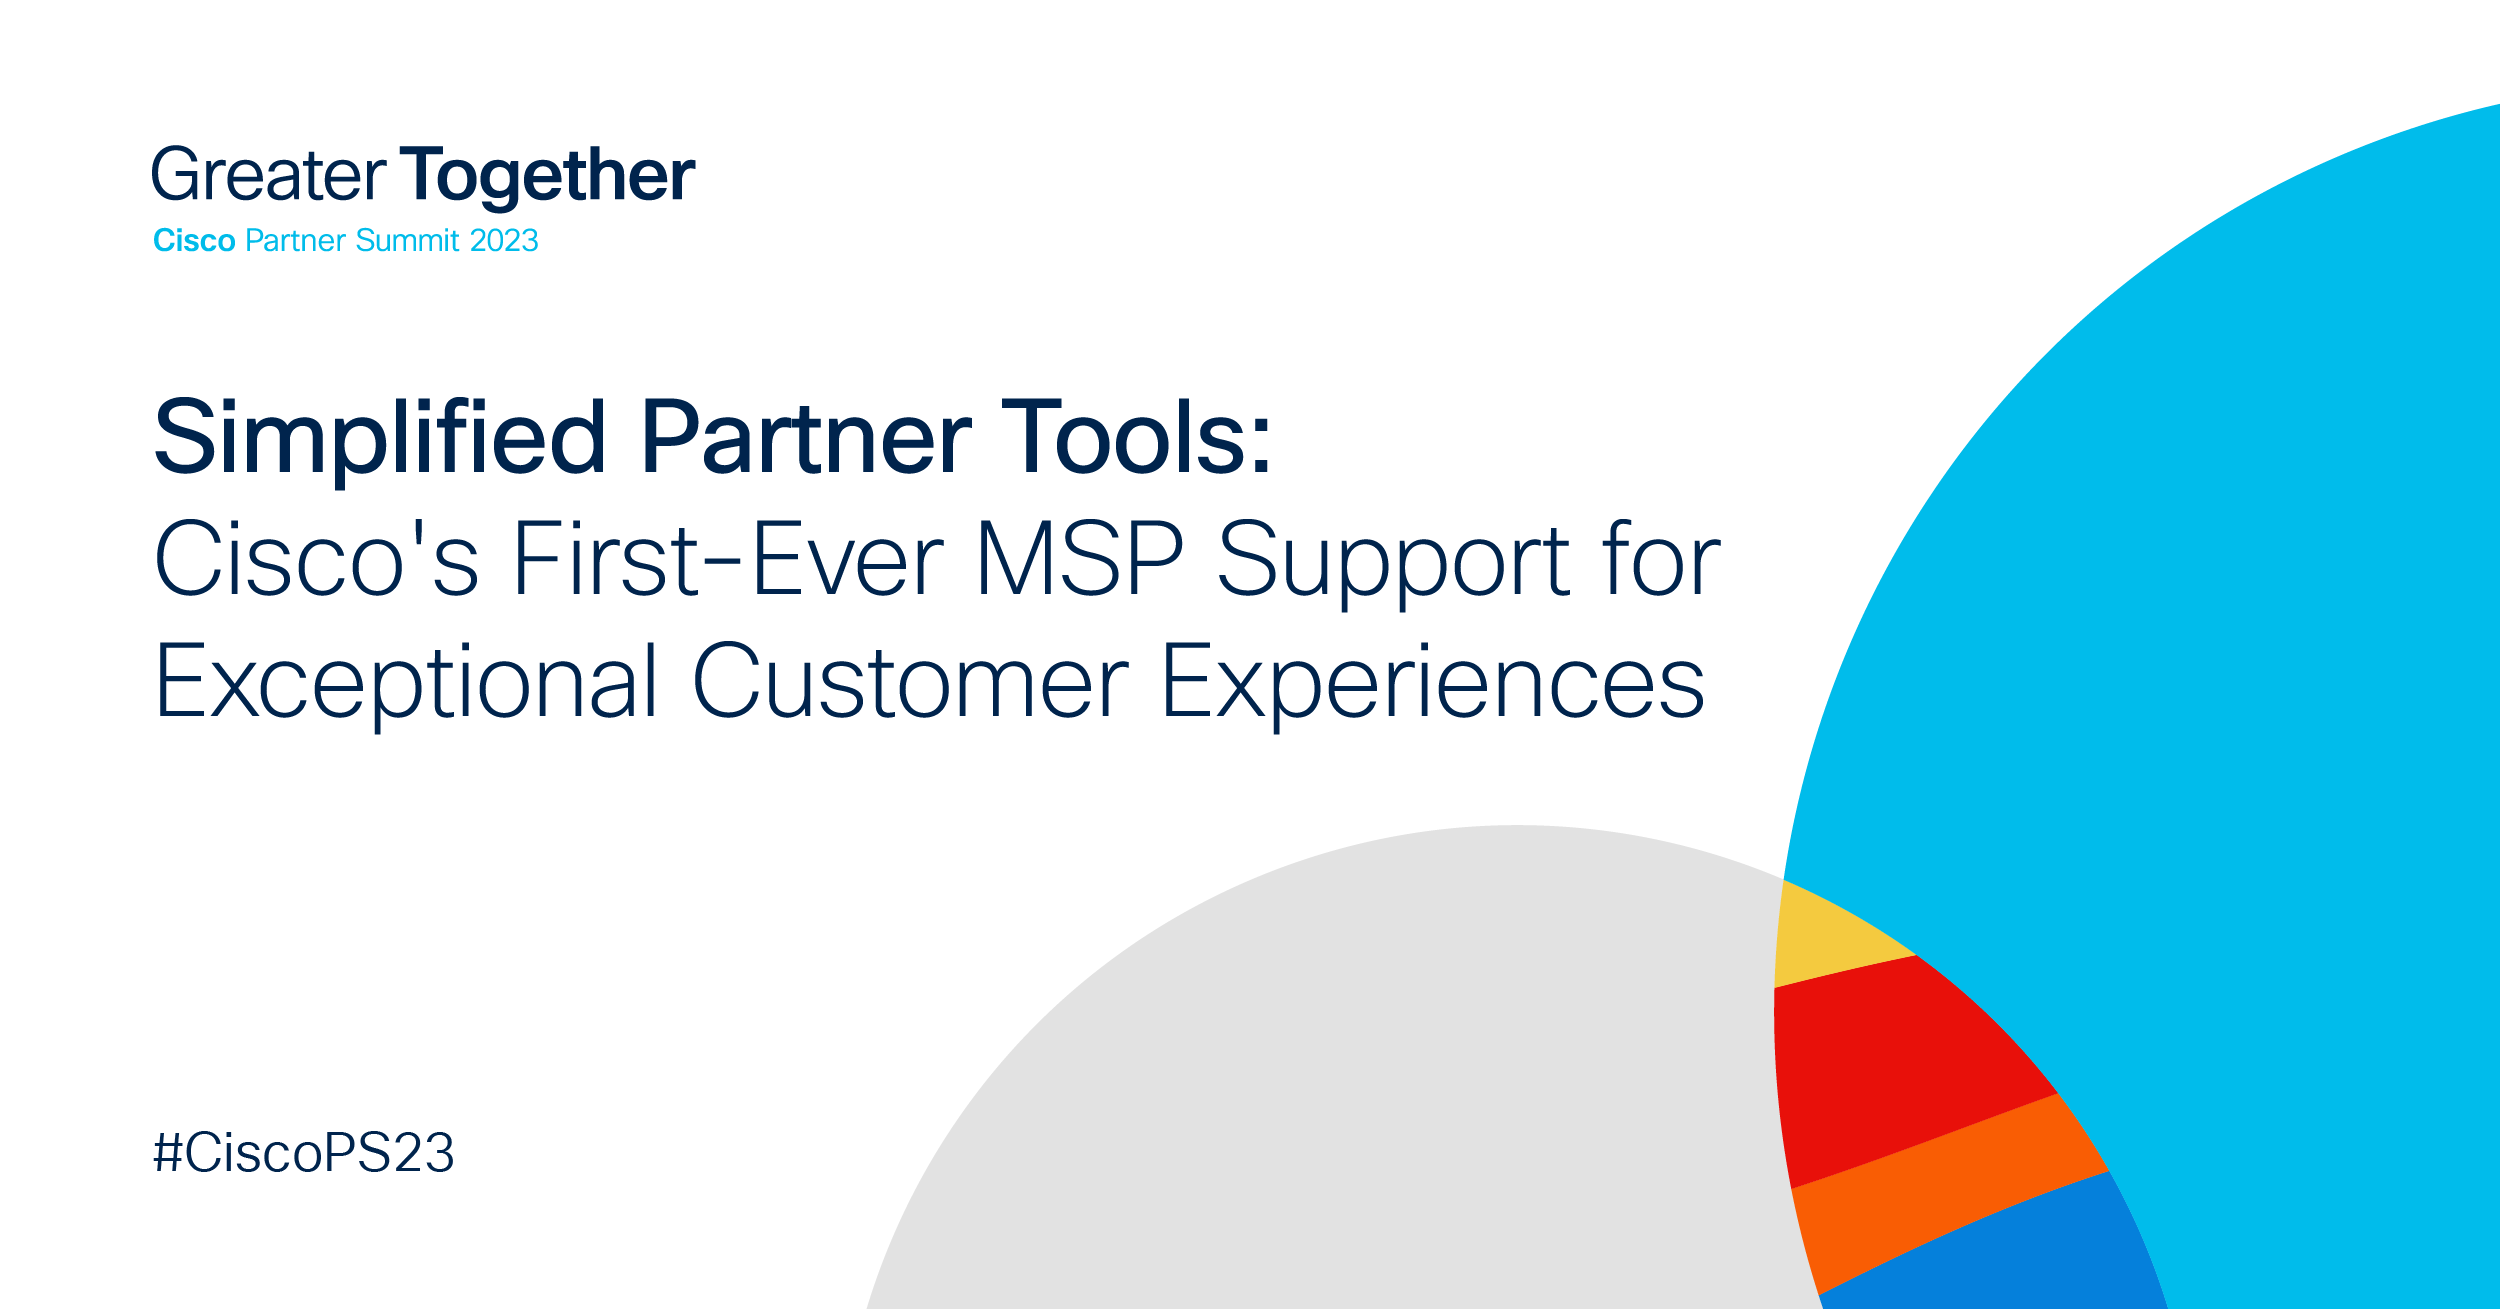 Simplified Partner Tools: Cisco’s First-Ever MSP Support for Exceptional Customer Experiences